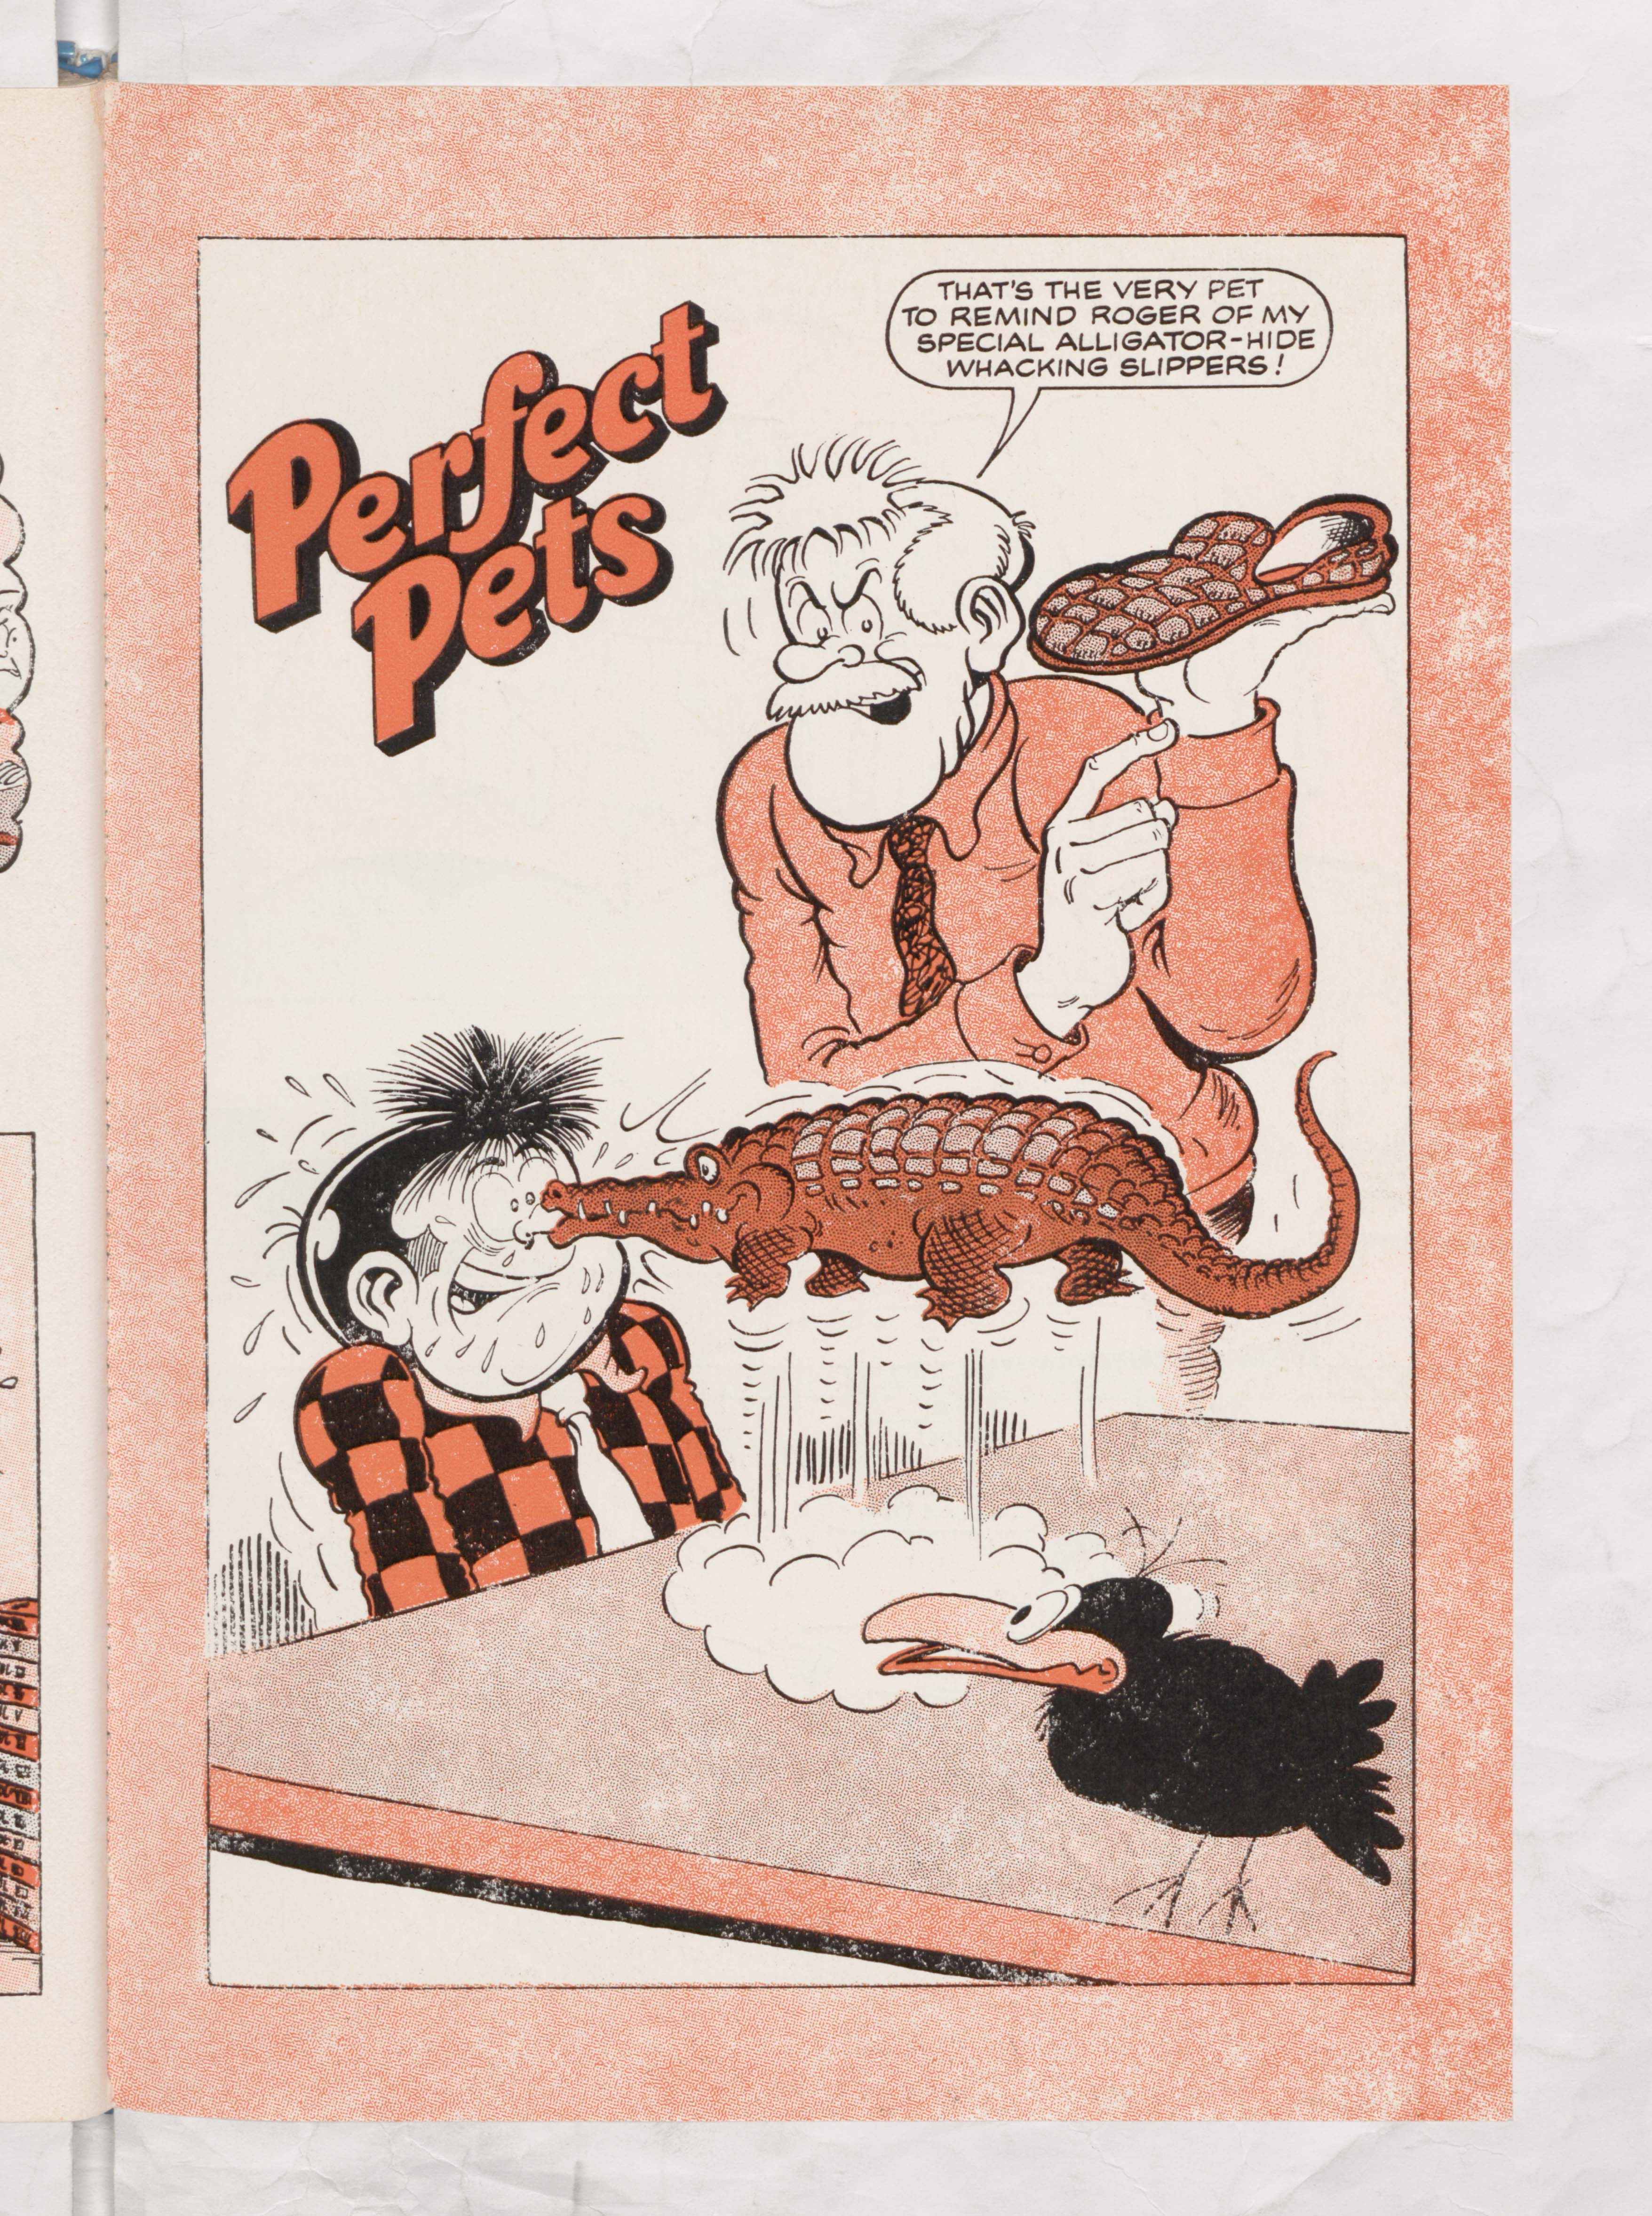 Perfect Pets - Roger the Dodger - Page 3 - Beano Annual 1979